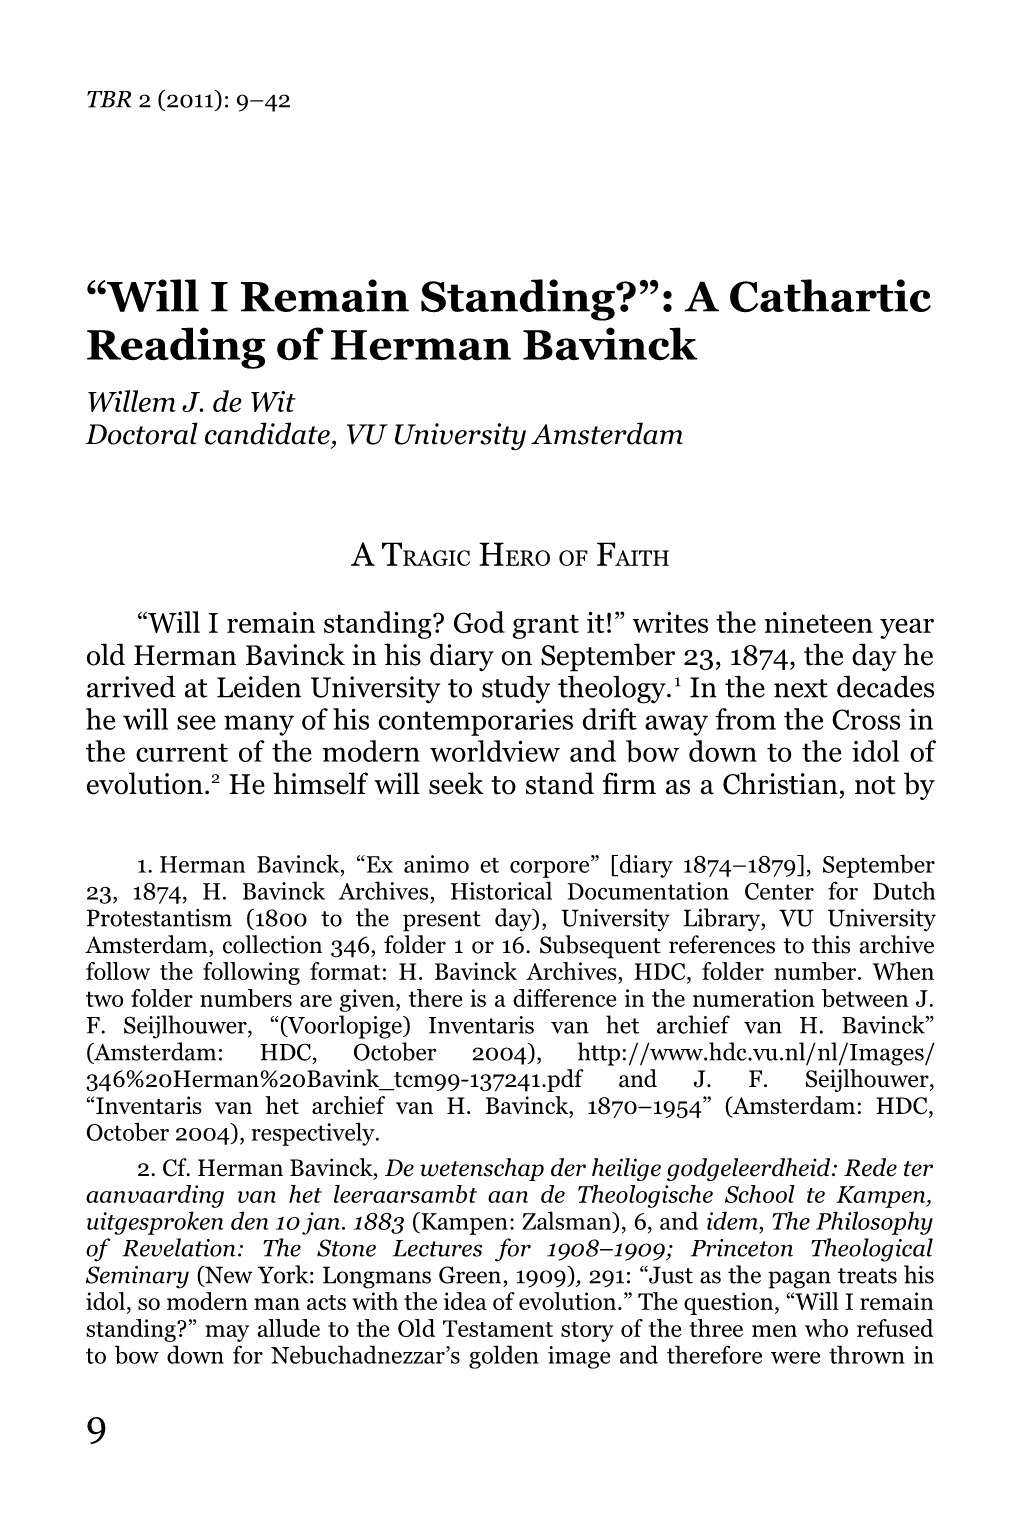 “Will I Remain Standing?”: a Cathartic Reading of Herman Bavinck Willem J